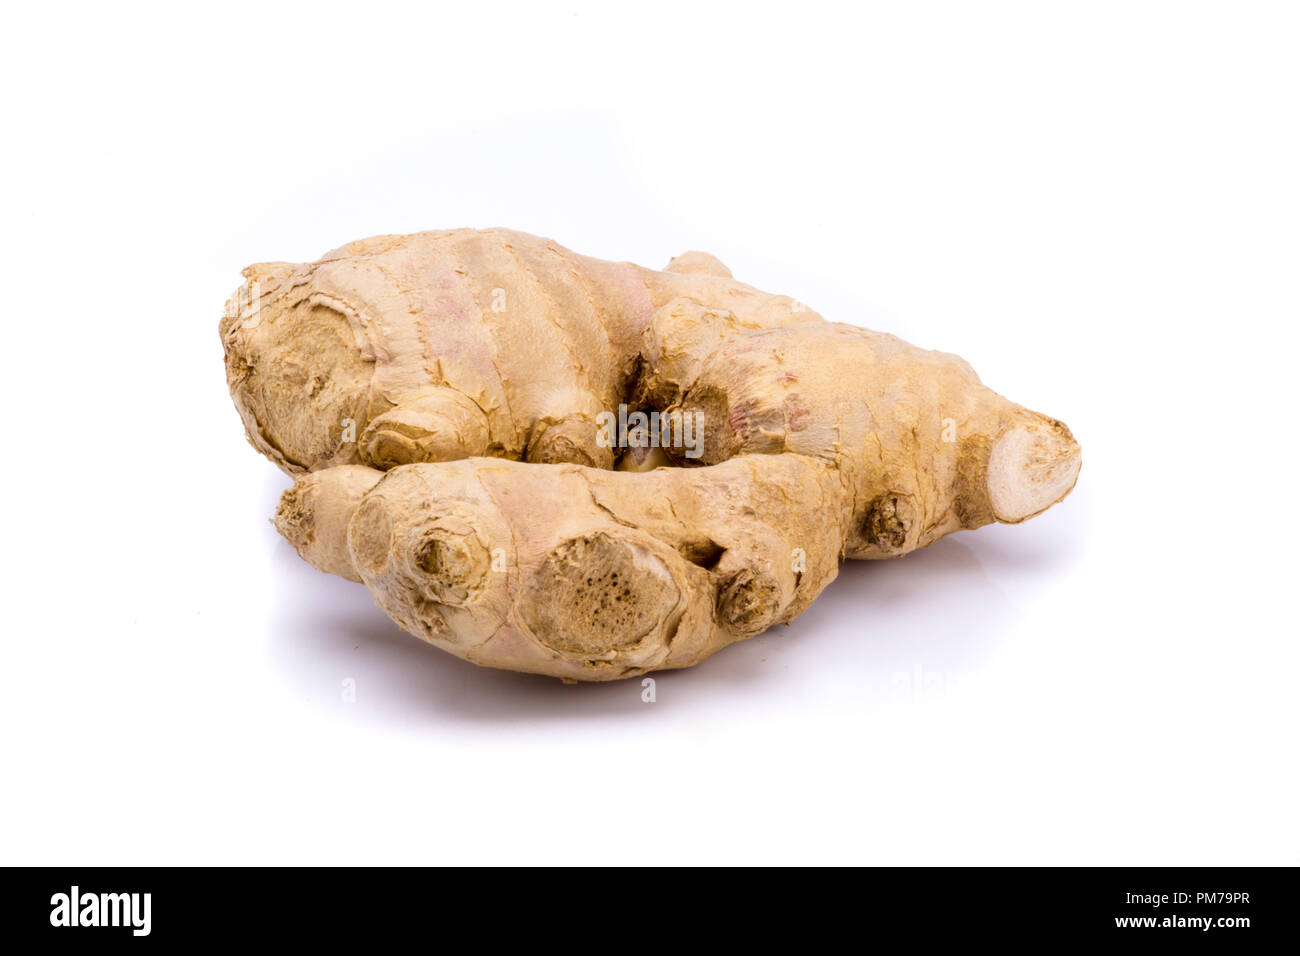 Piece of ginger isolated on a white background Stock Photo